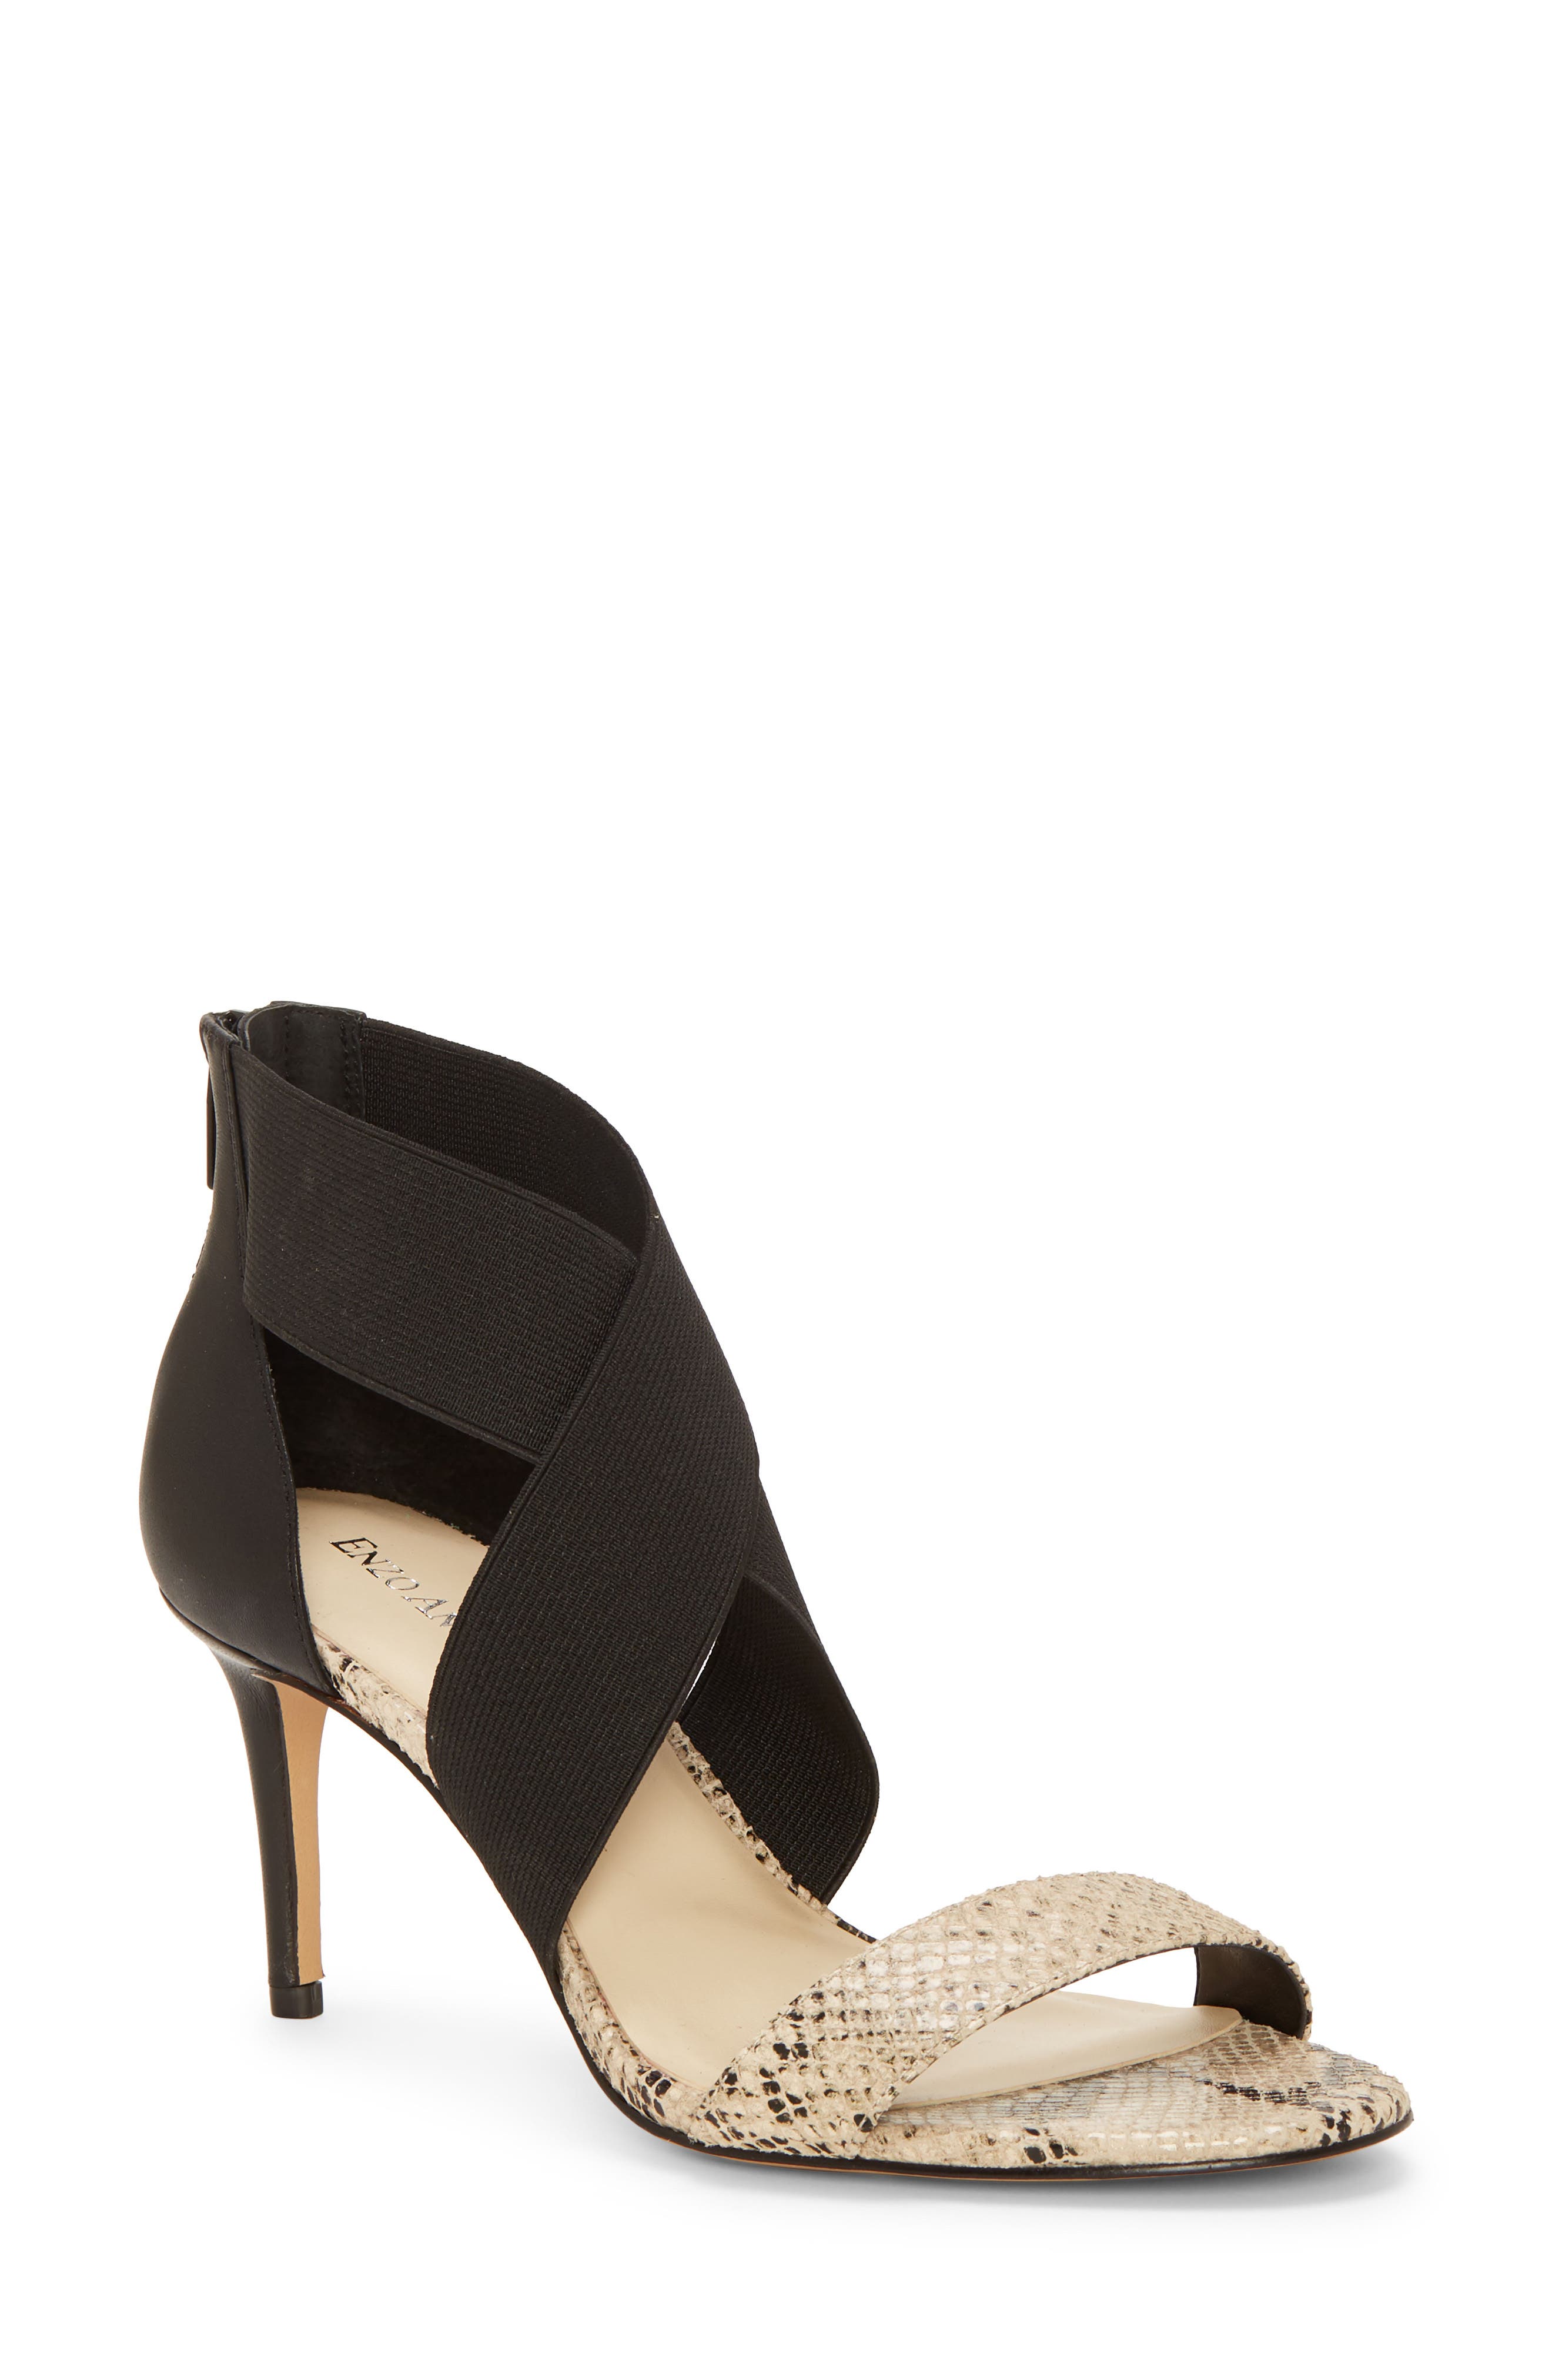 Women's Enzo Angiolini Shoes | Nordstrom